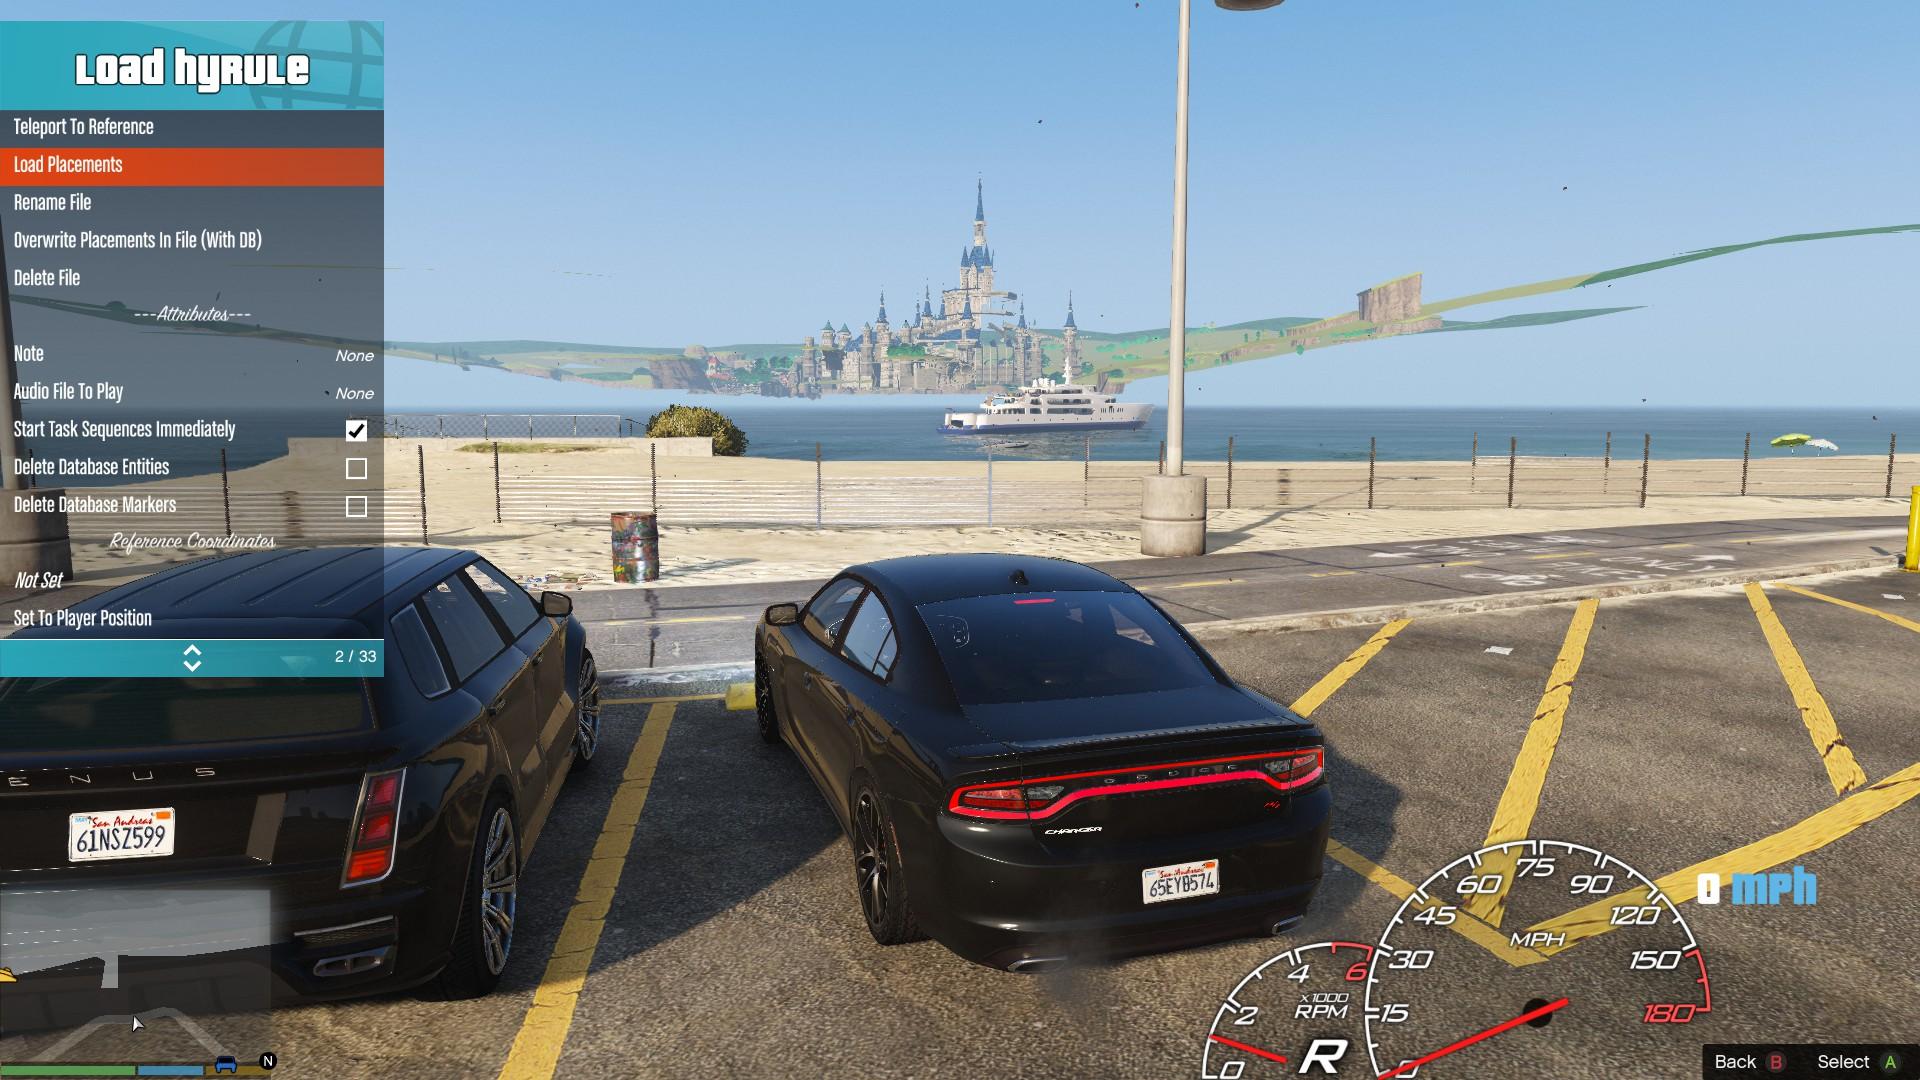 can play free mode gta 5 online with different console